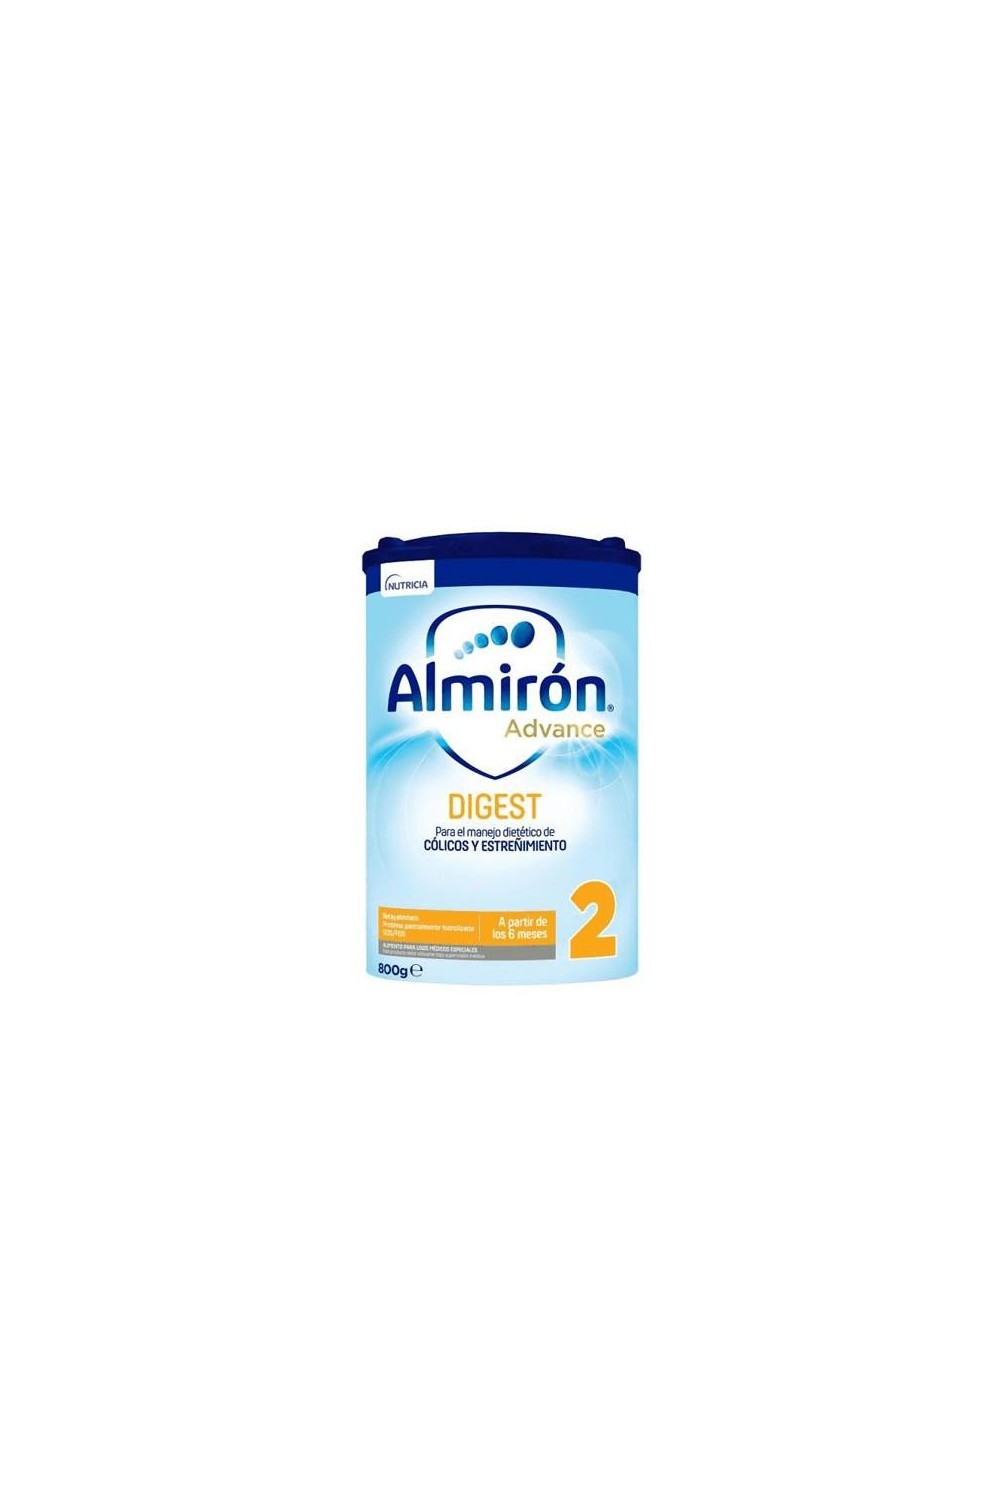 ALMIRÓN - Almirón Advance Digest 2 For Colic and Constipation 800g